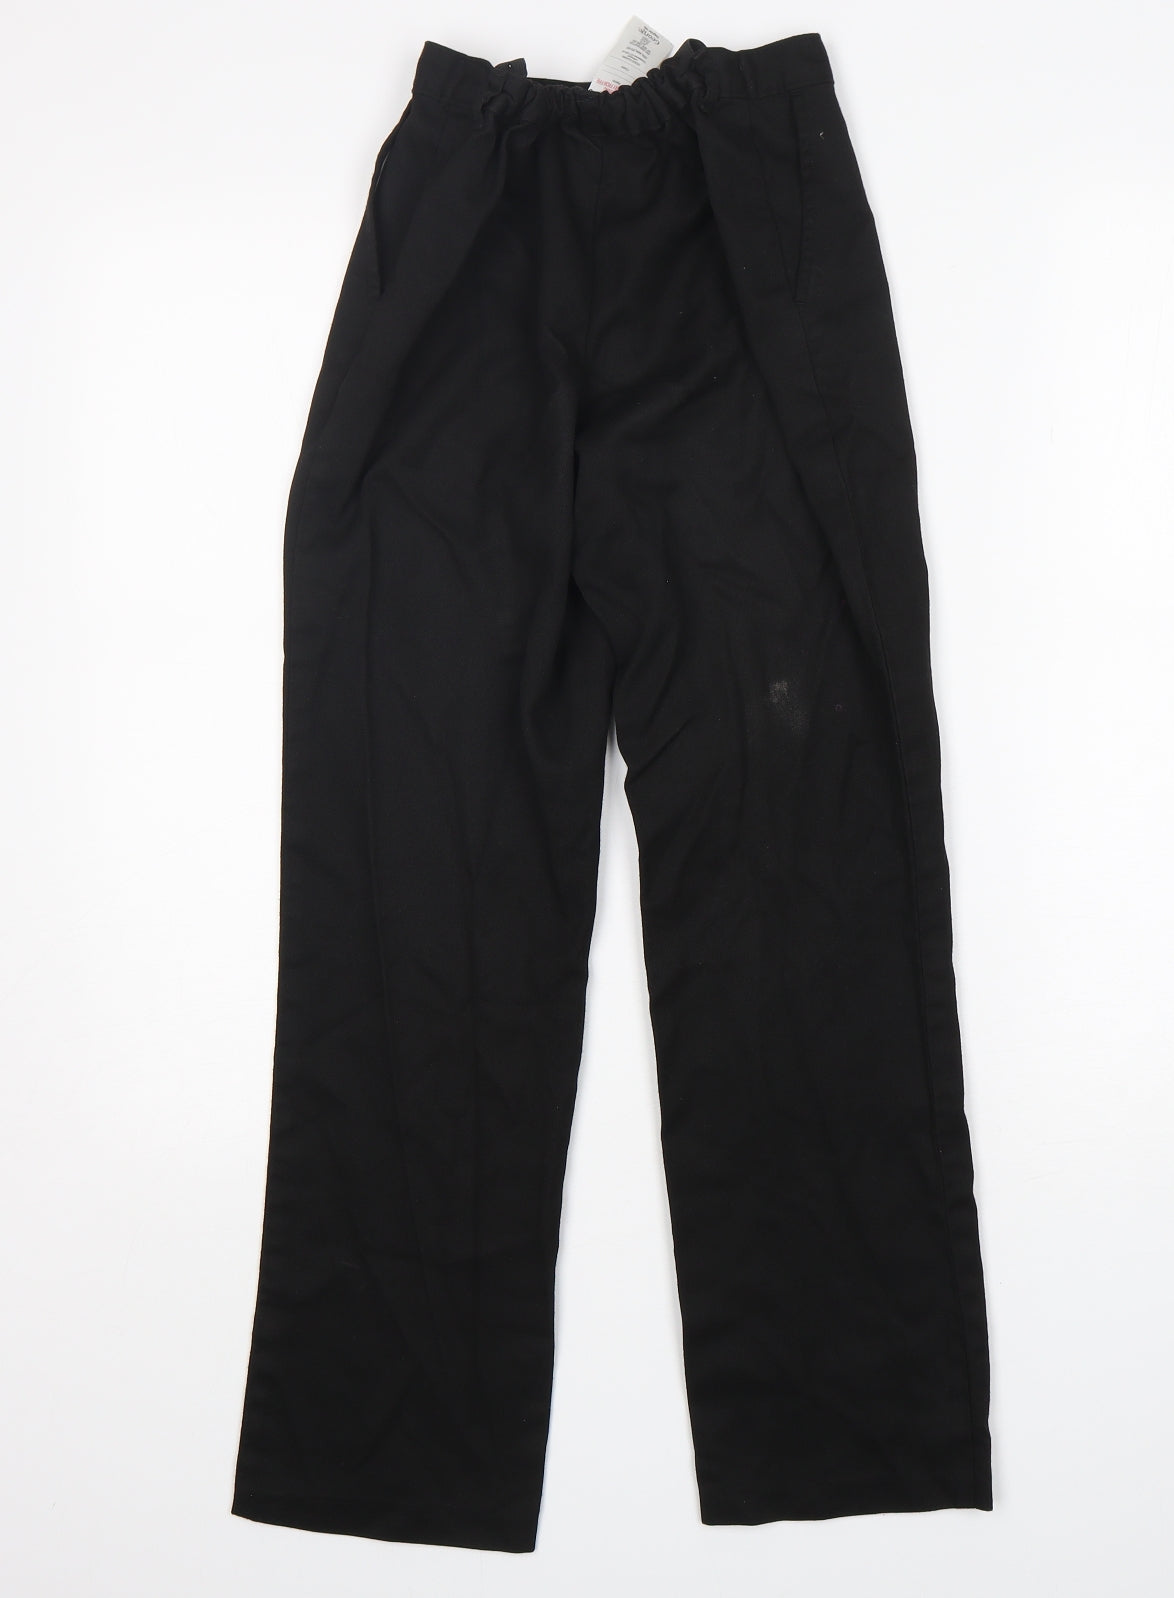 George Boys Black  Polyester Dress Pants Trousers Size 11-12 Years  Regular